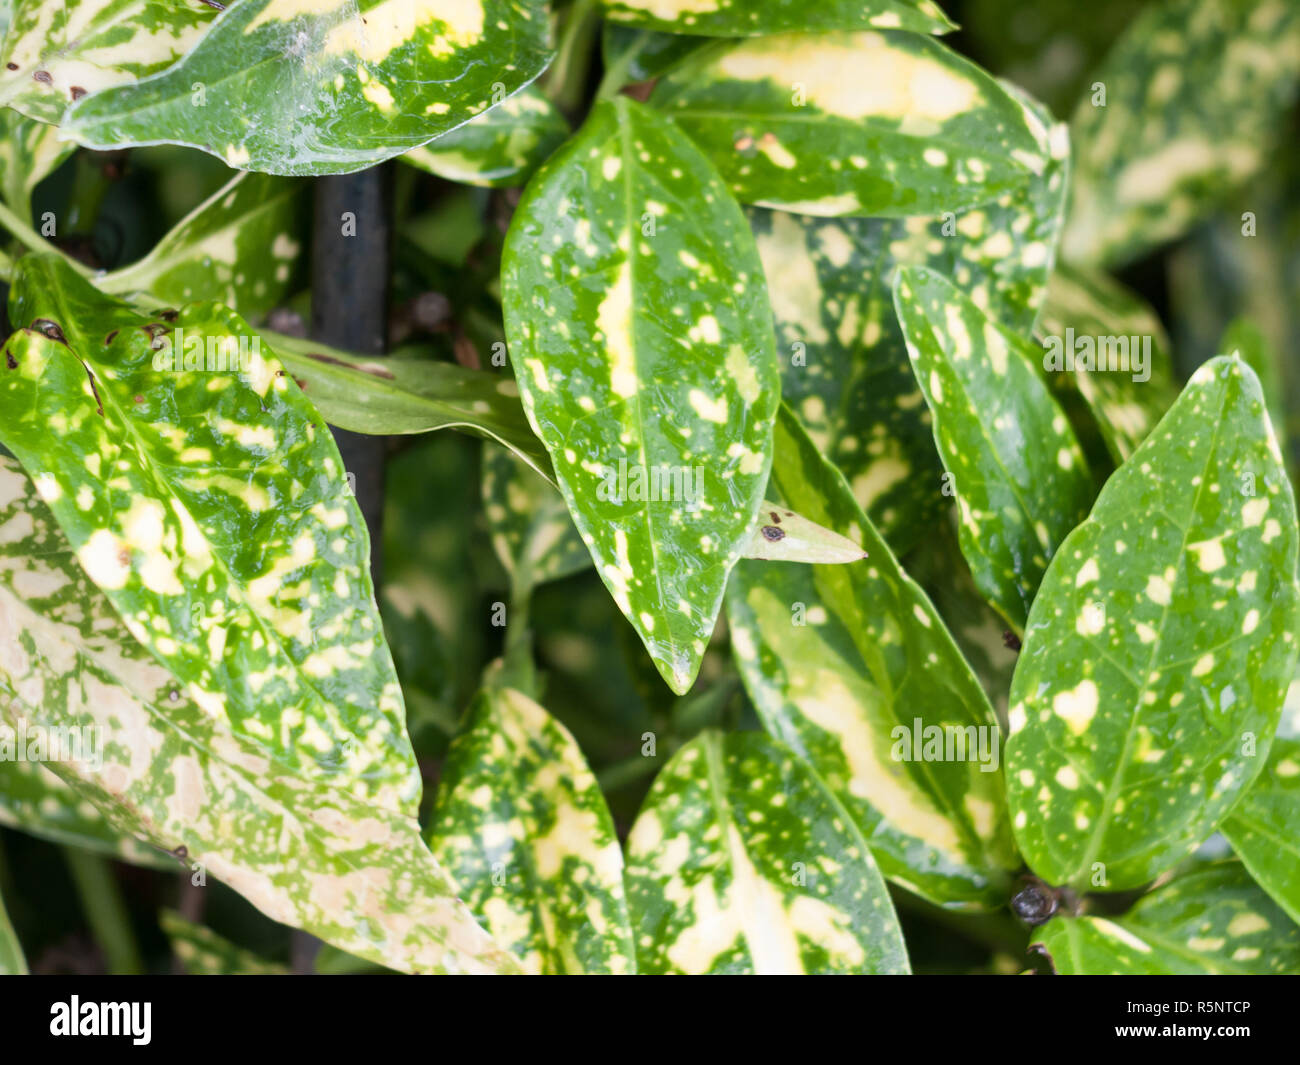 close up green and yellow variegated foliage background Stock Photo